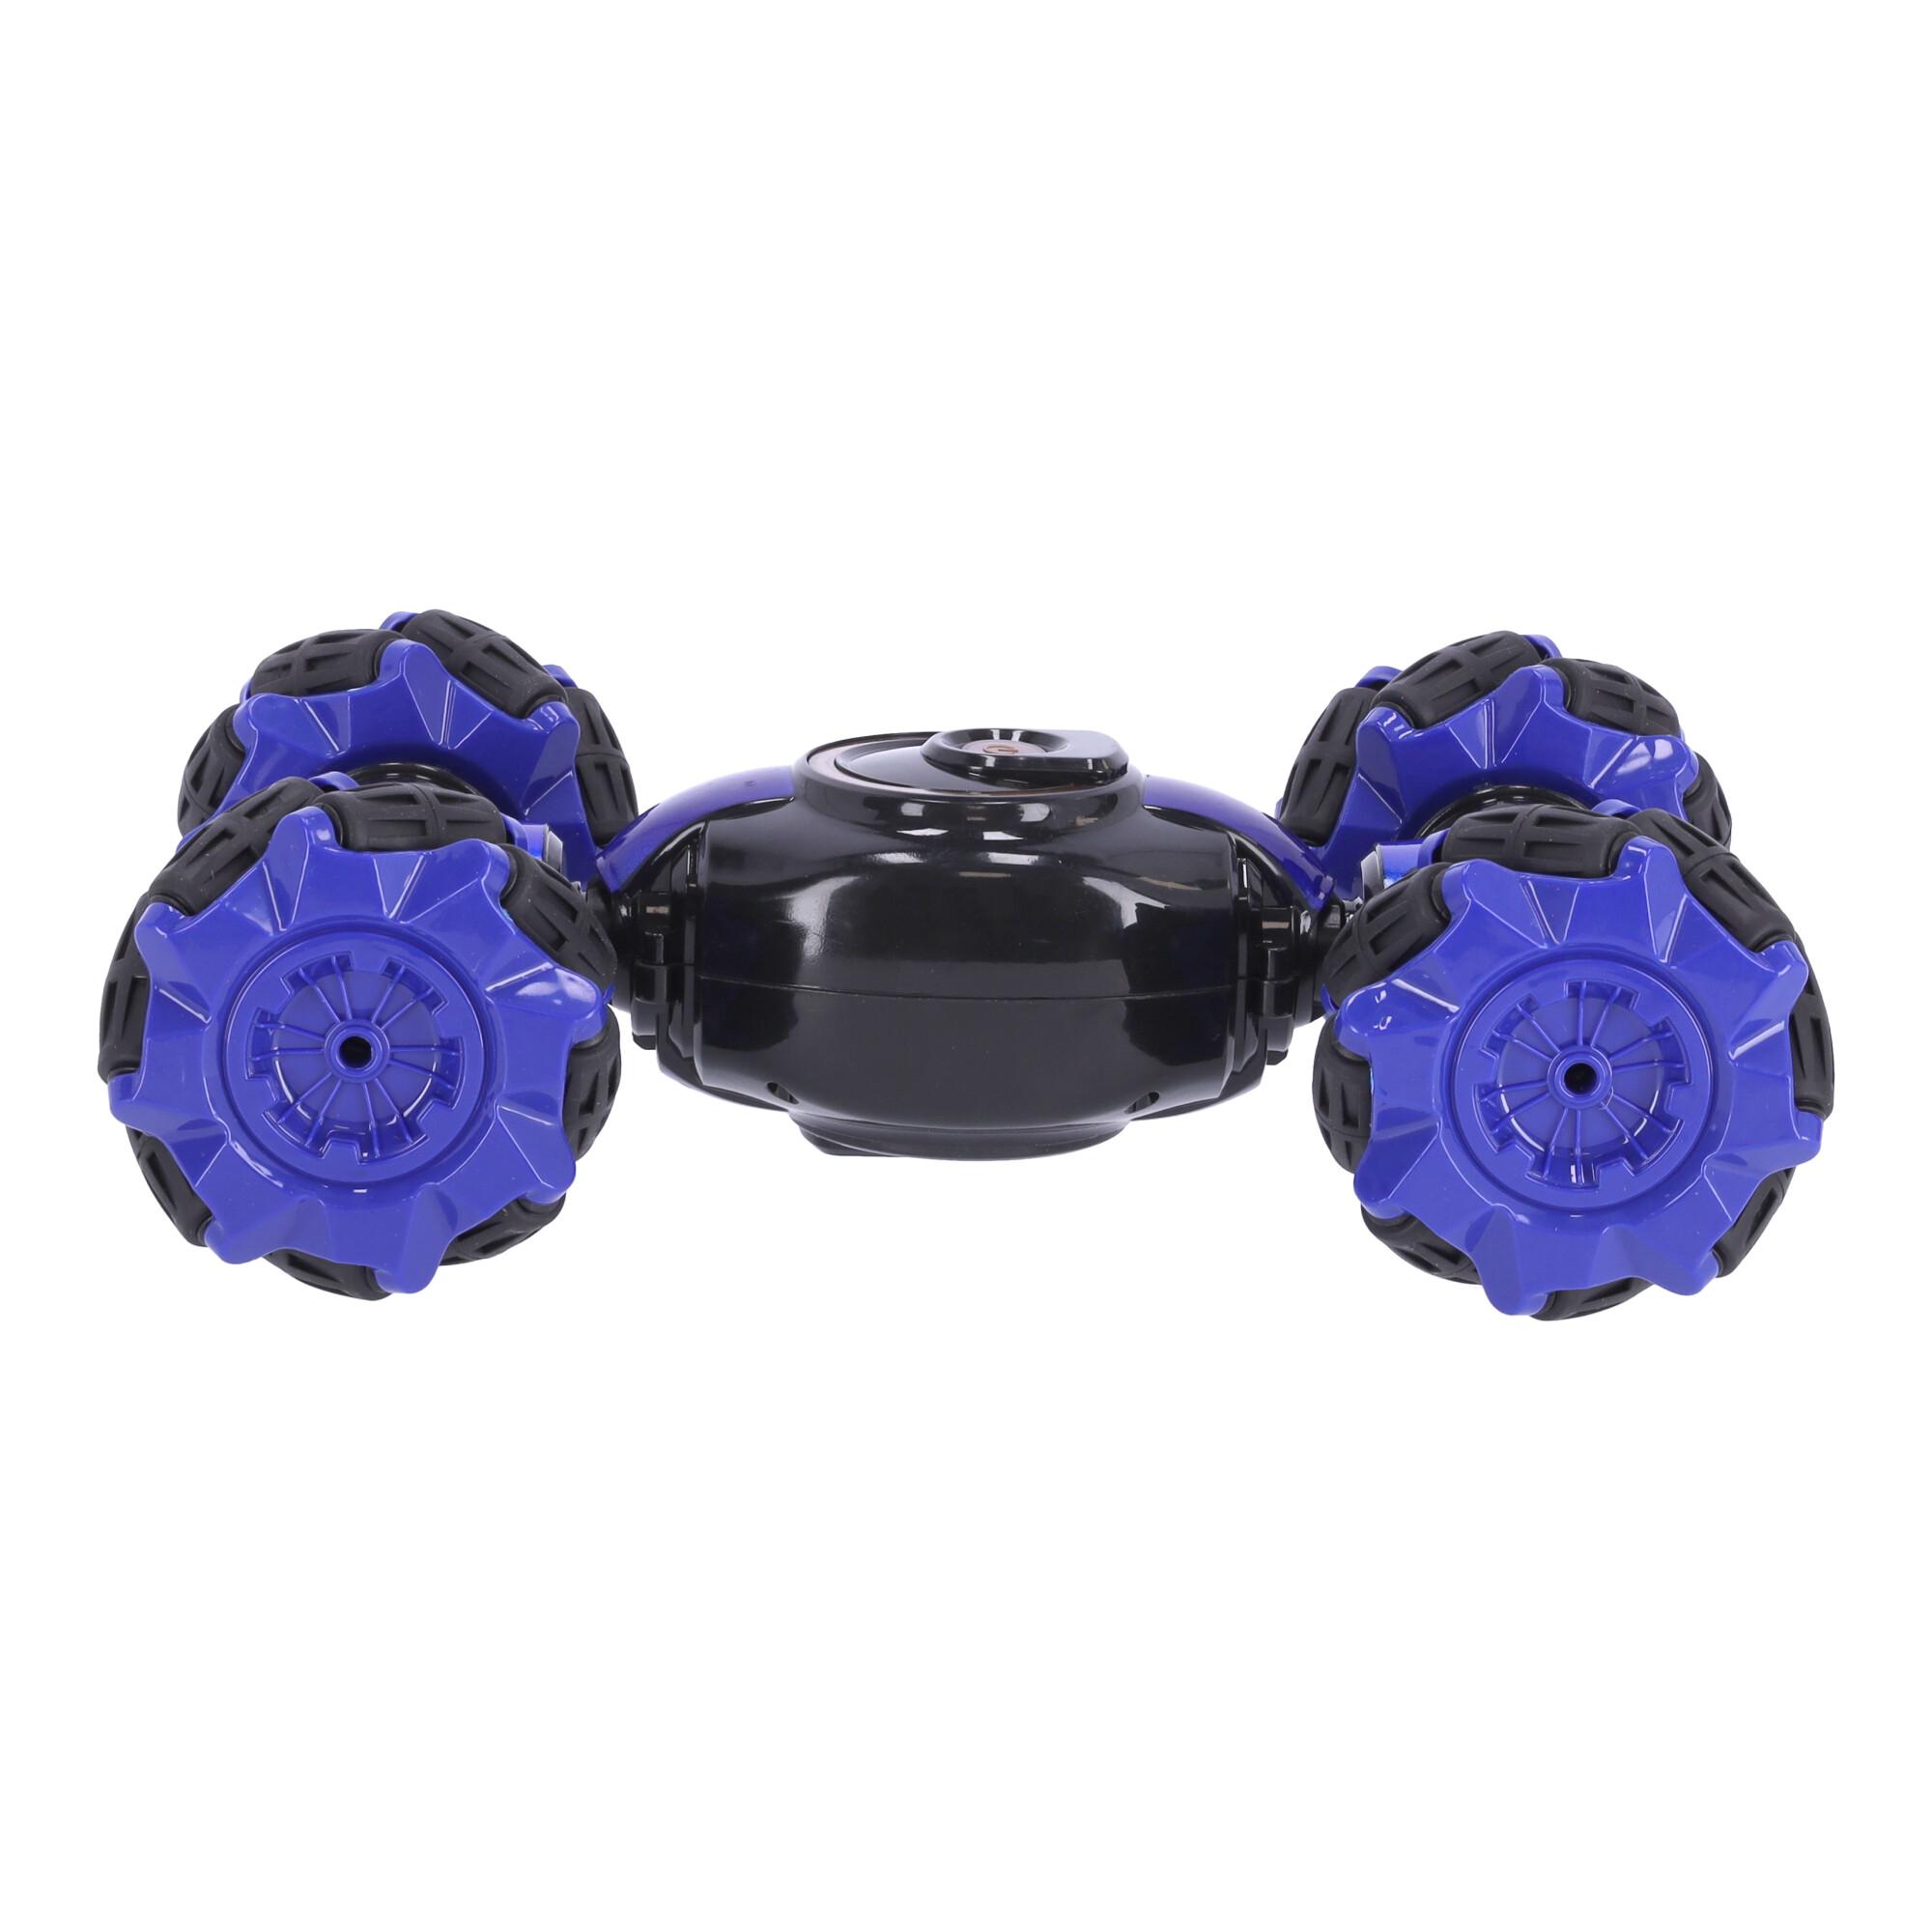 Remote controlled car with gestures, controller, remote control - blue